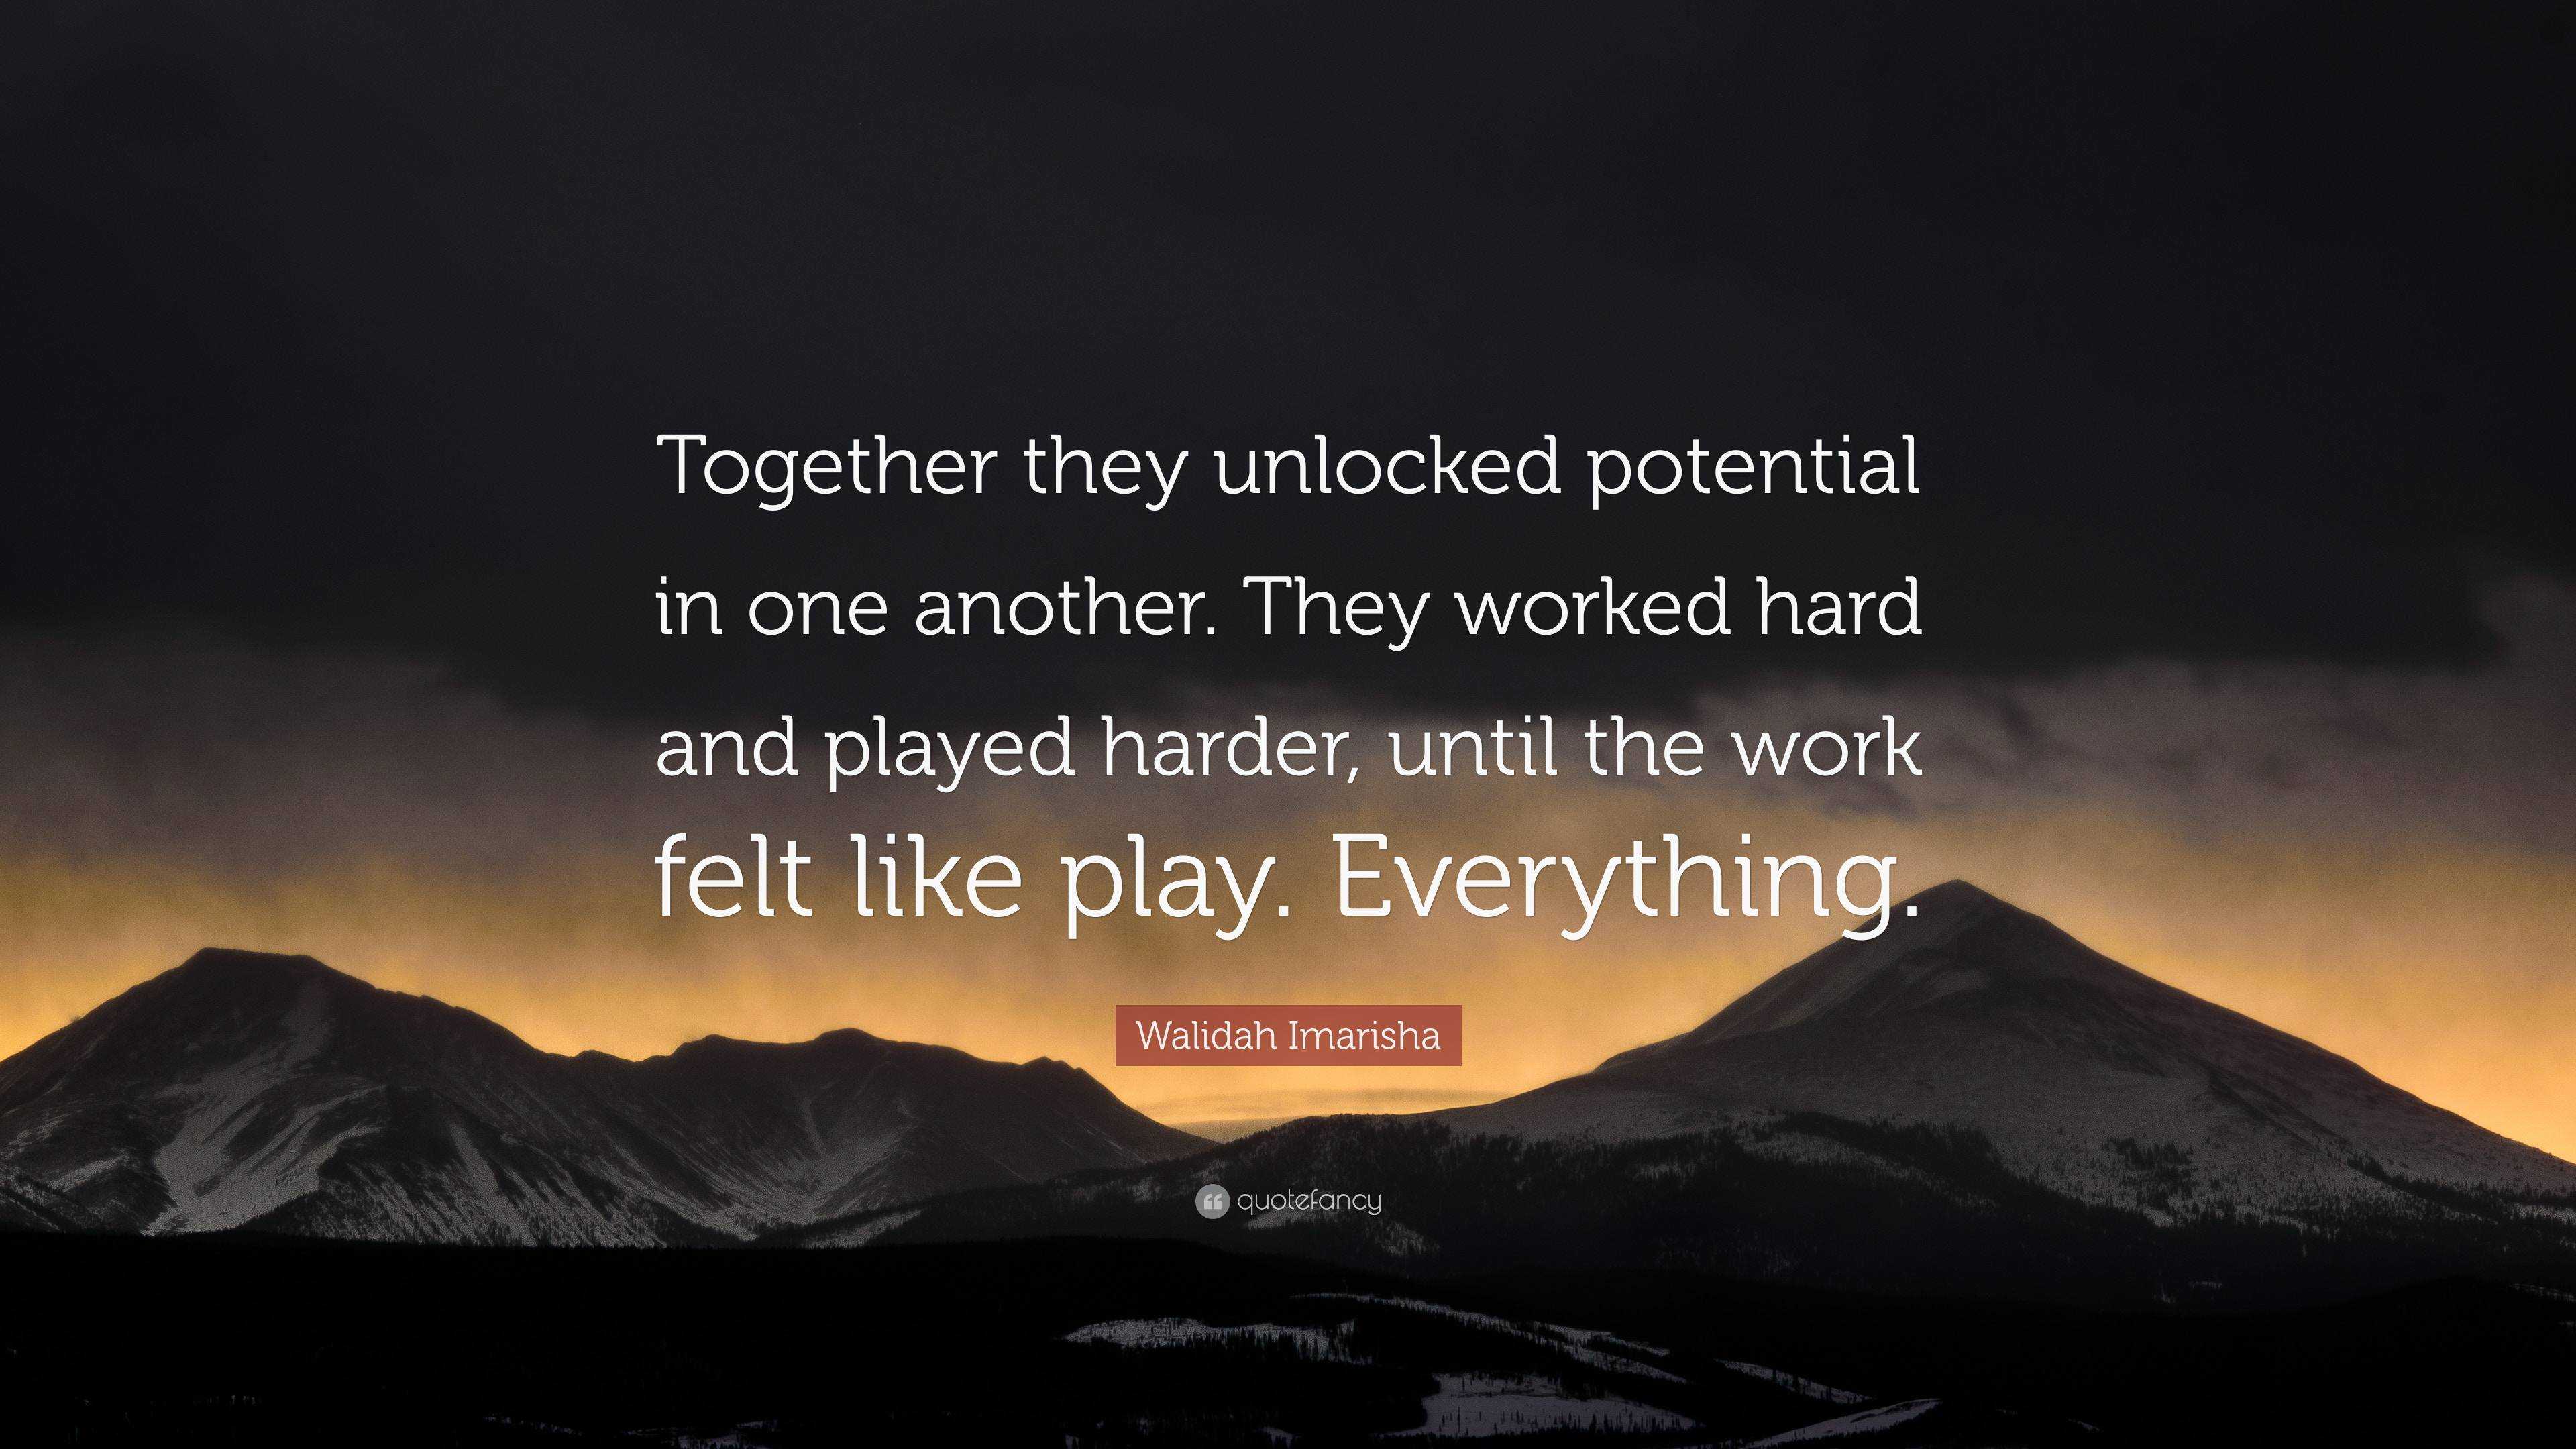 Walidah Imarisha Quote: “Together they unlocked potential in one another.  They worked hard and played harder, until the work felt like play. Ever”